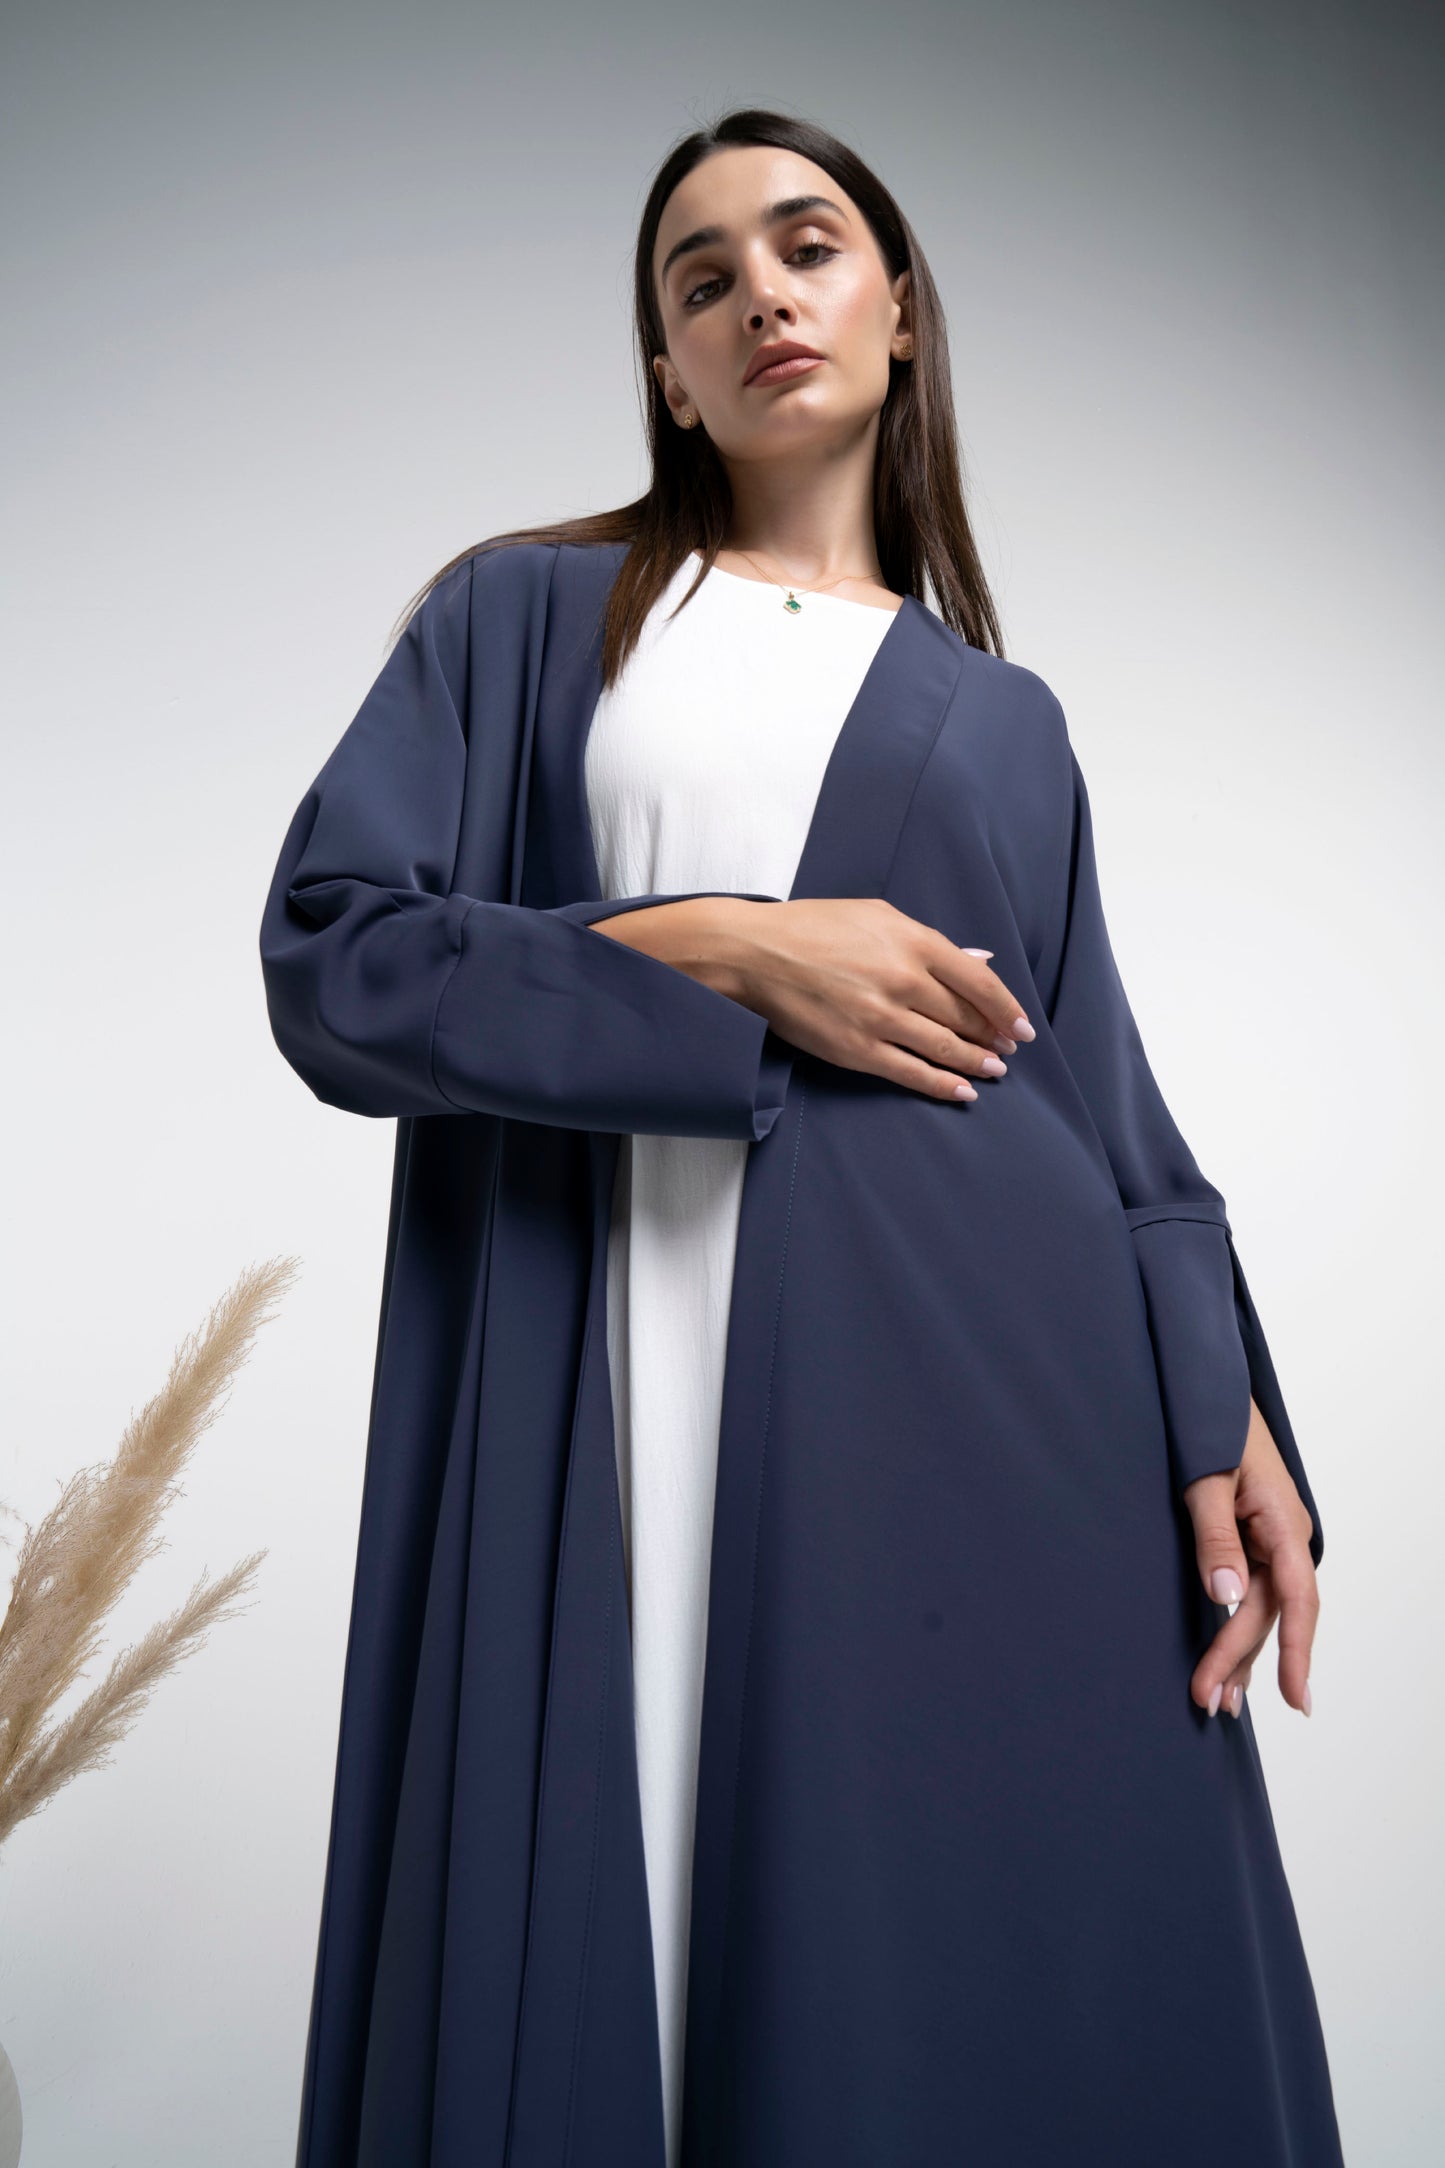 Purple bisht abaya with collar and cross pattern sleeves